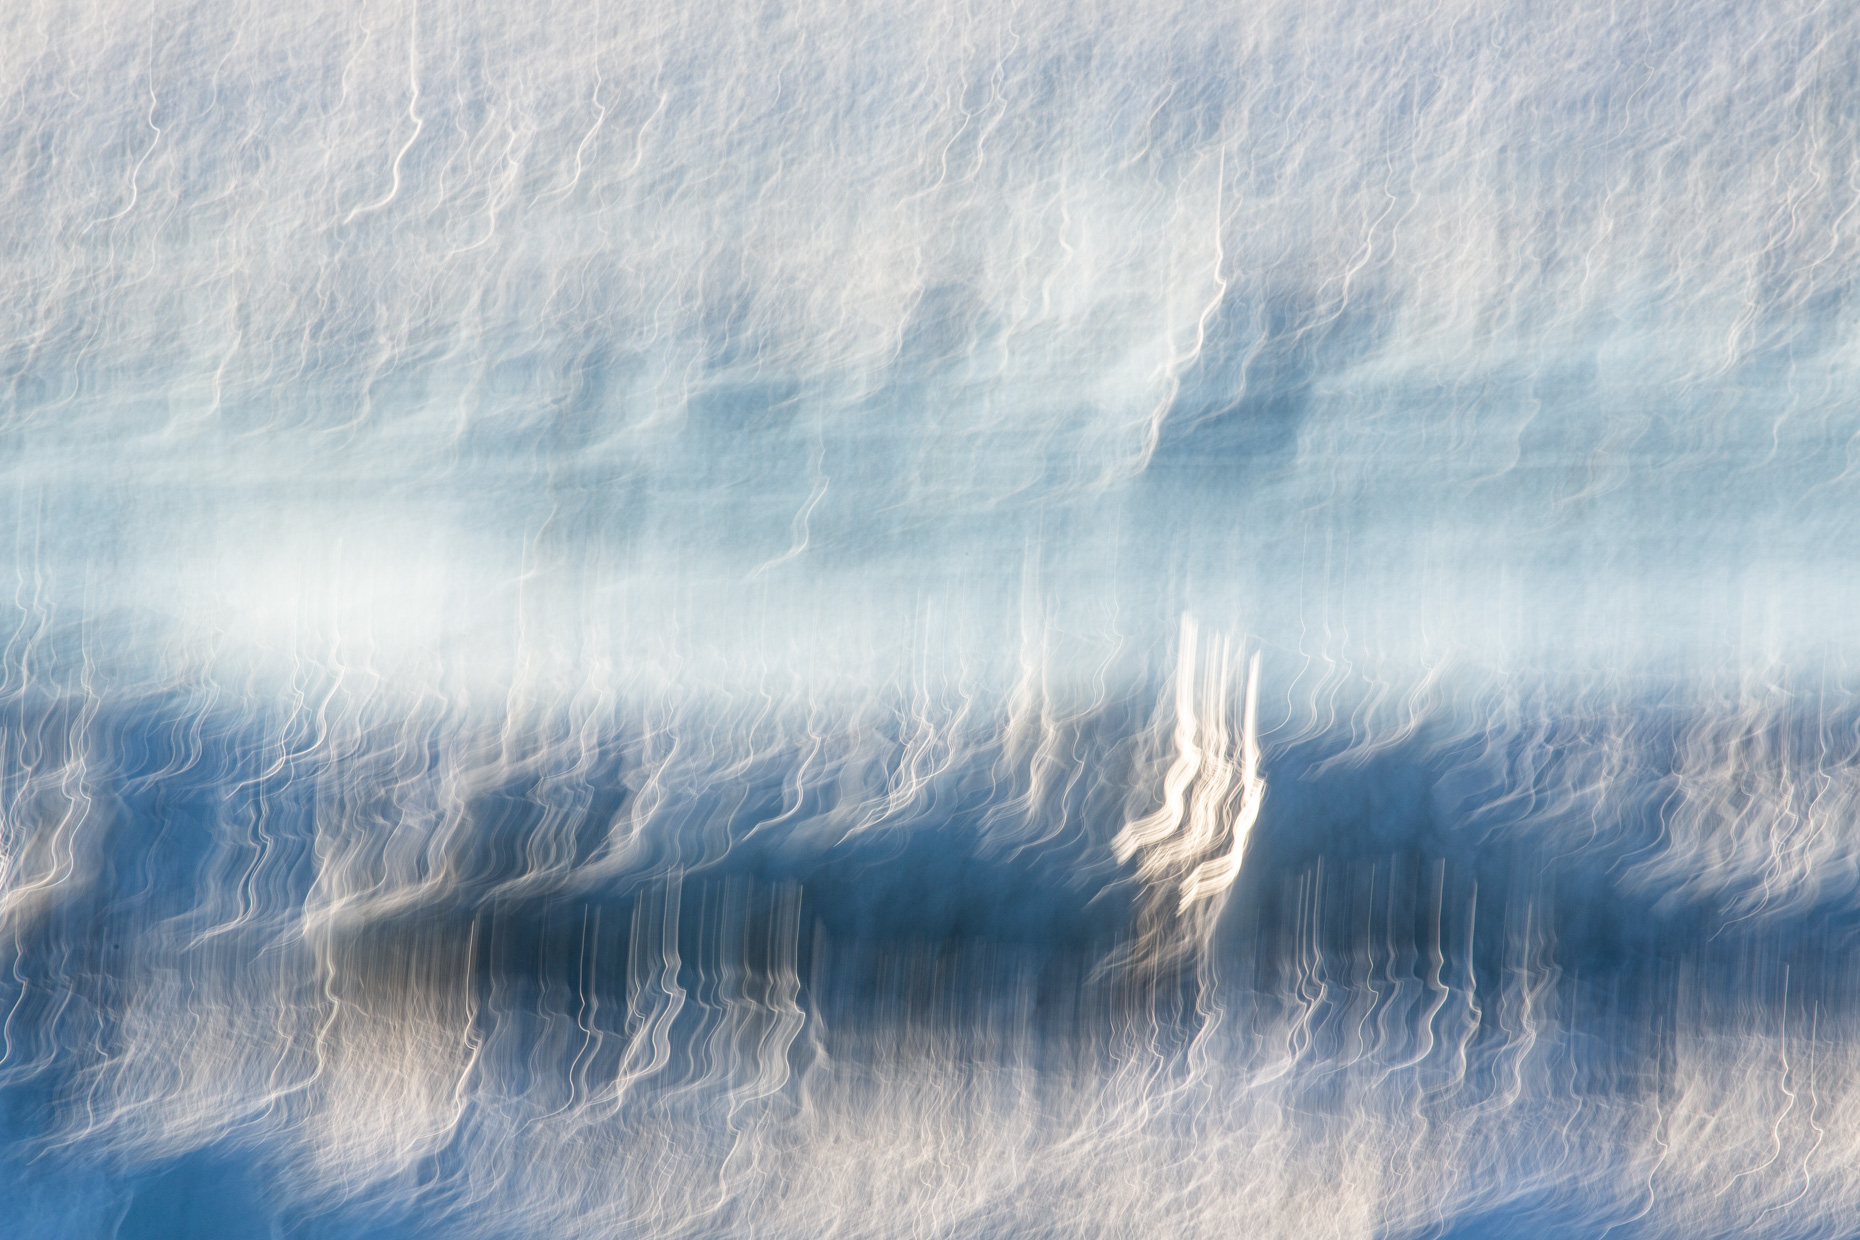 BECOMING_RIVER_ICM_GRIEF_CLIMATE_CHANGE_WINTER_ICE_SAINT_LAWRENCE_RIVER_QUEBEC_CANADA-6